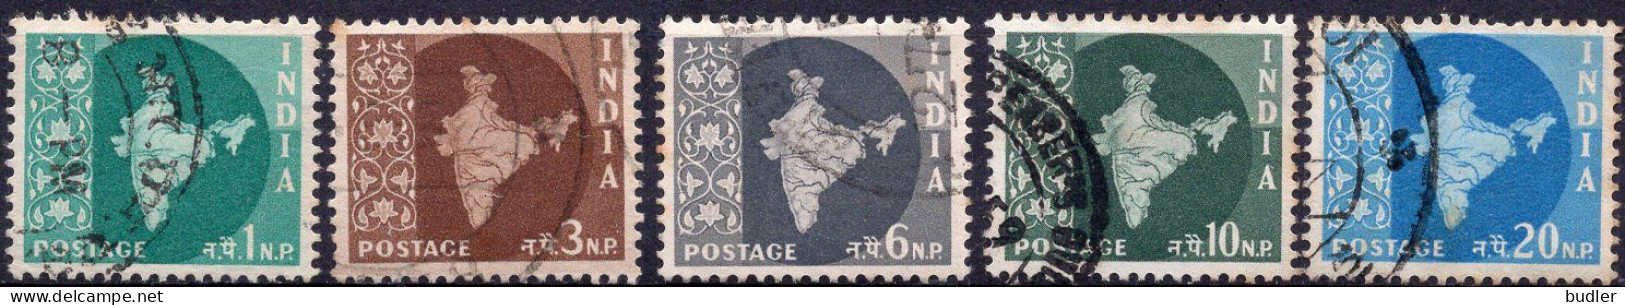 INDIA :1957-58: Y.71,73,75,76,79° : Gestempeld / Oblitéré / Cancelled. - Used Stamps